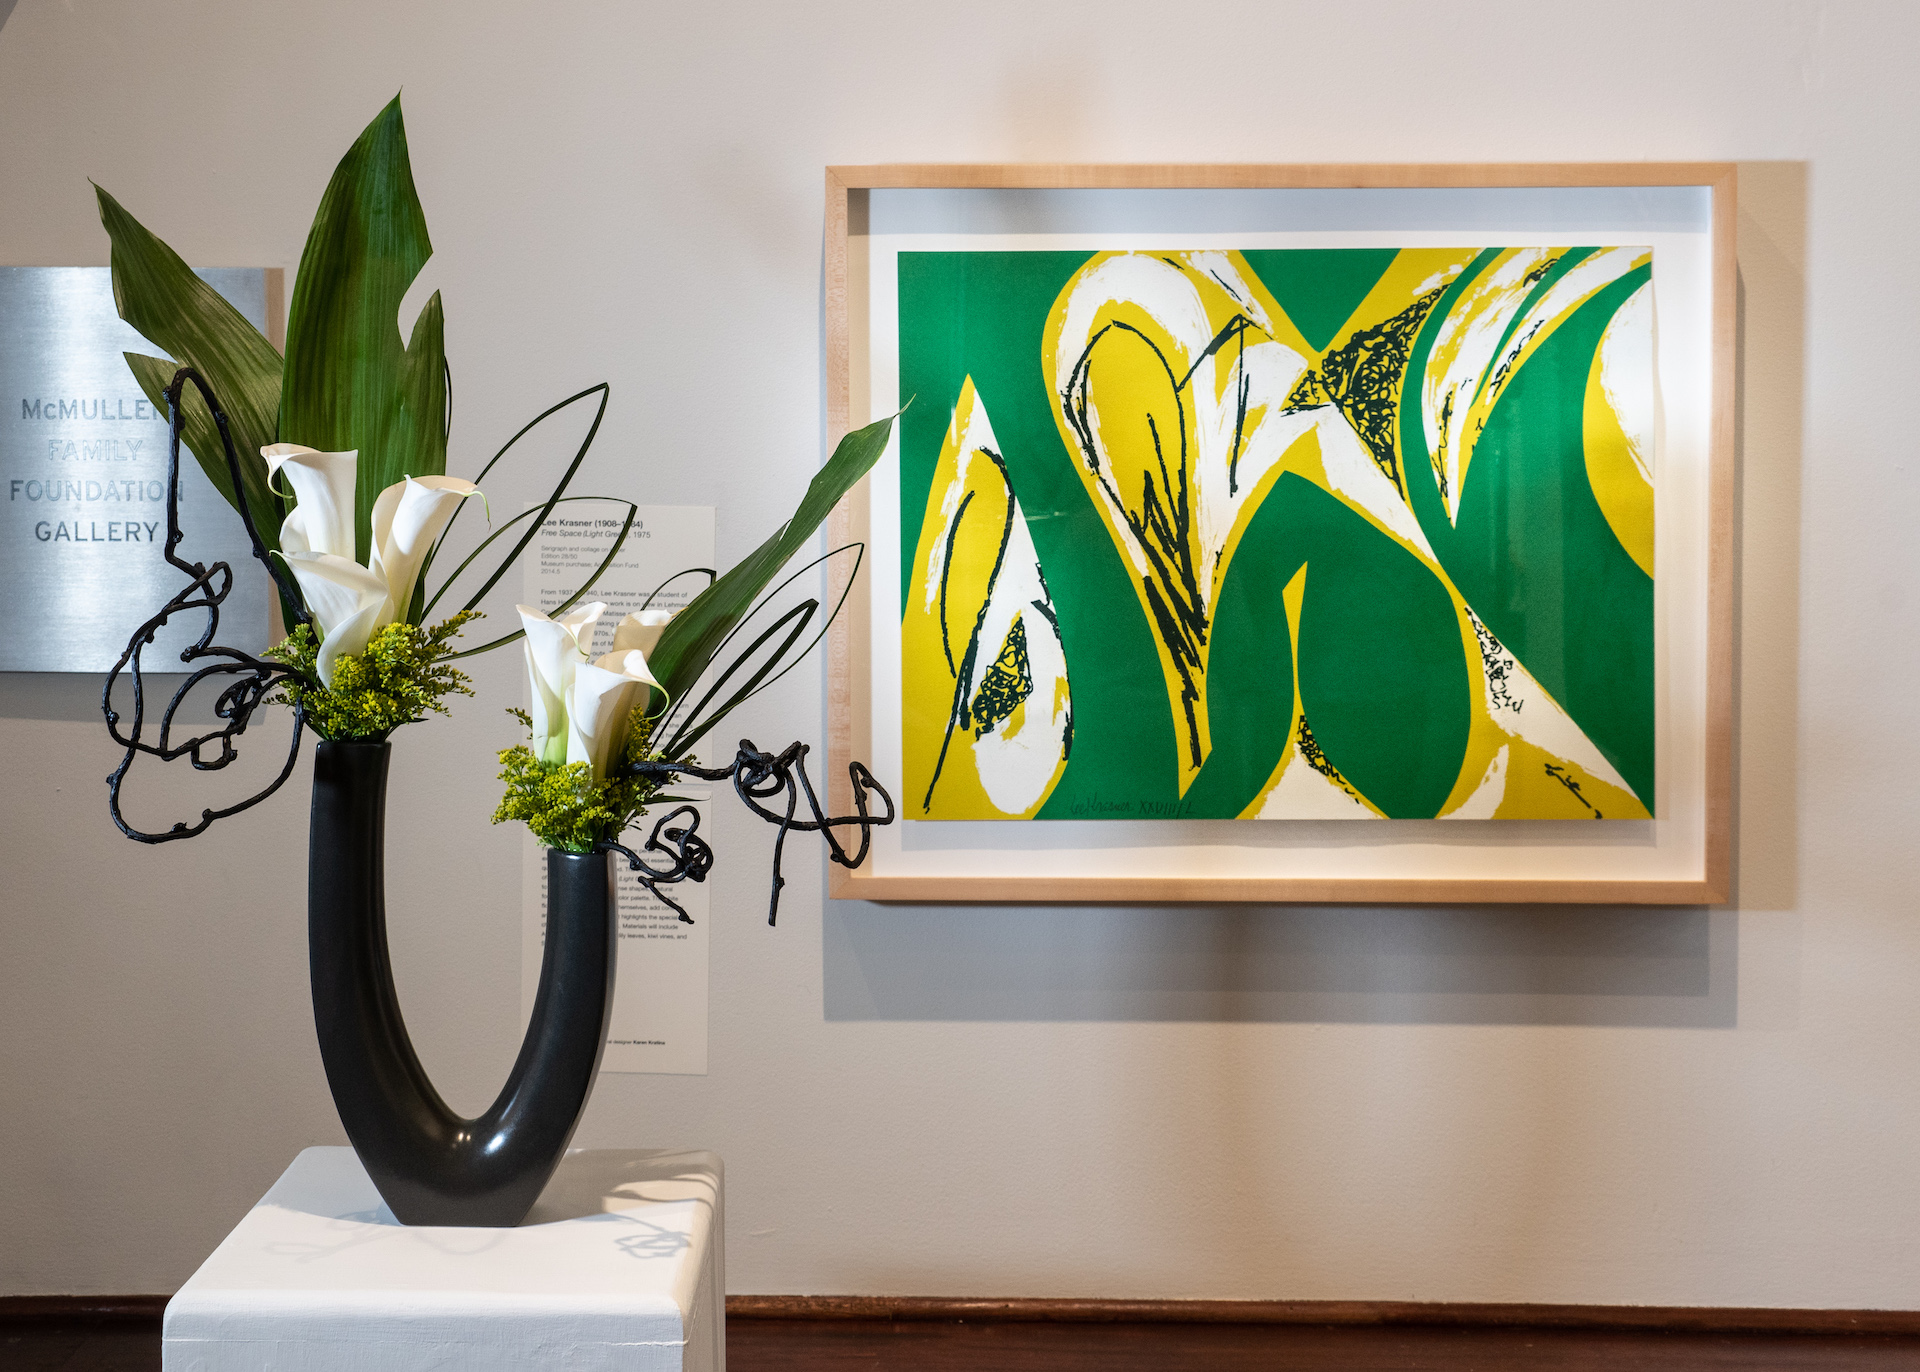 A sculptural floral arrangement in front of the artwork that inspired it in the gallery.